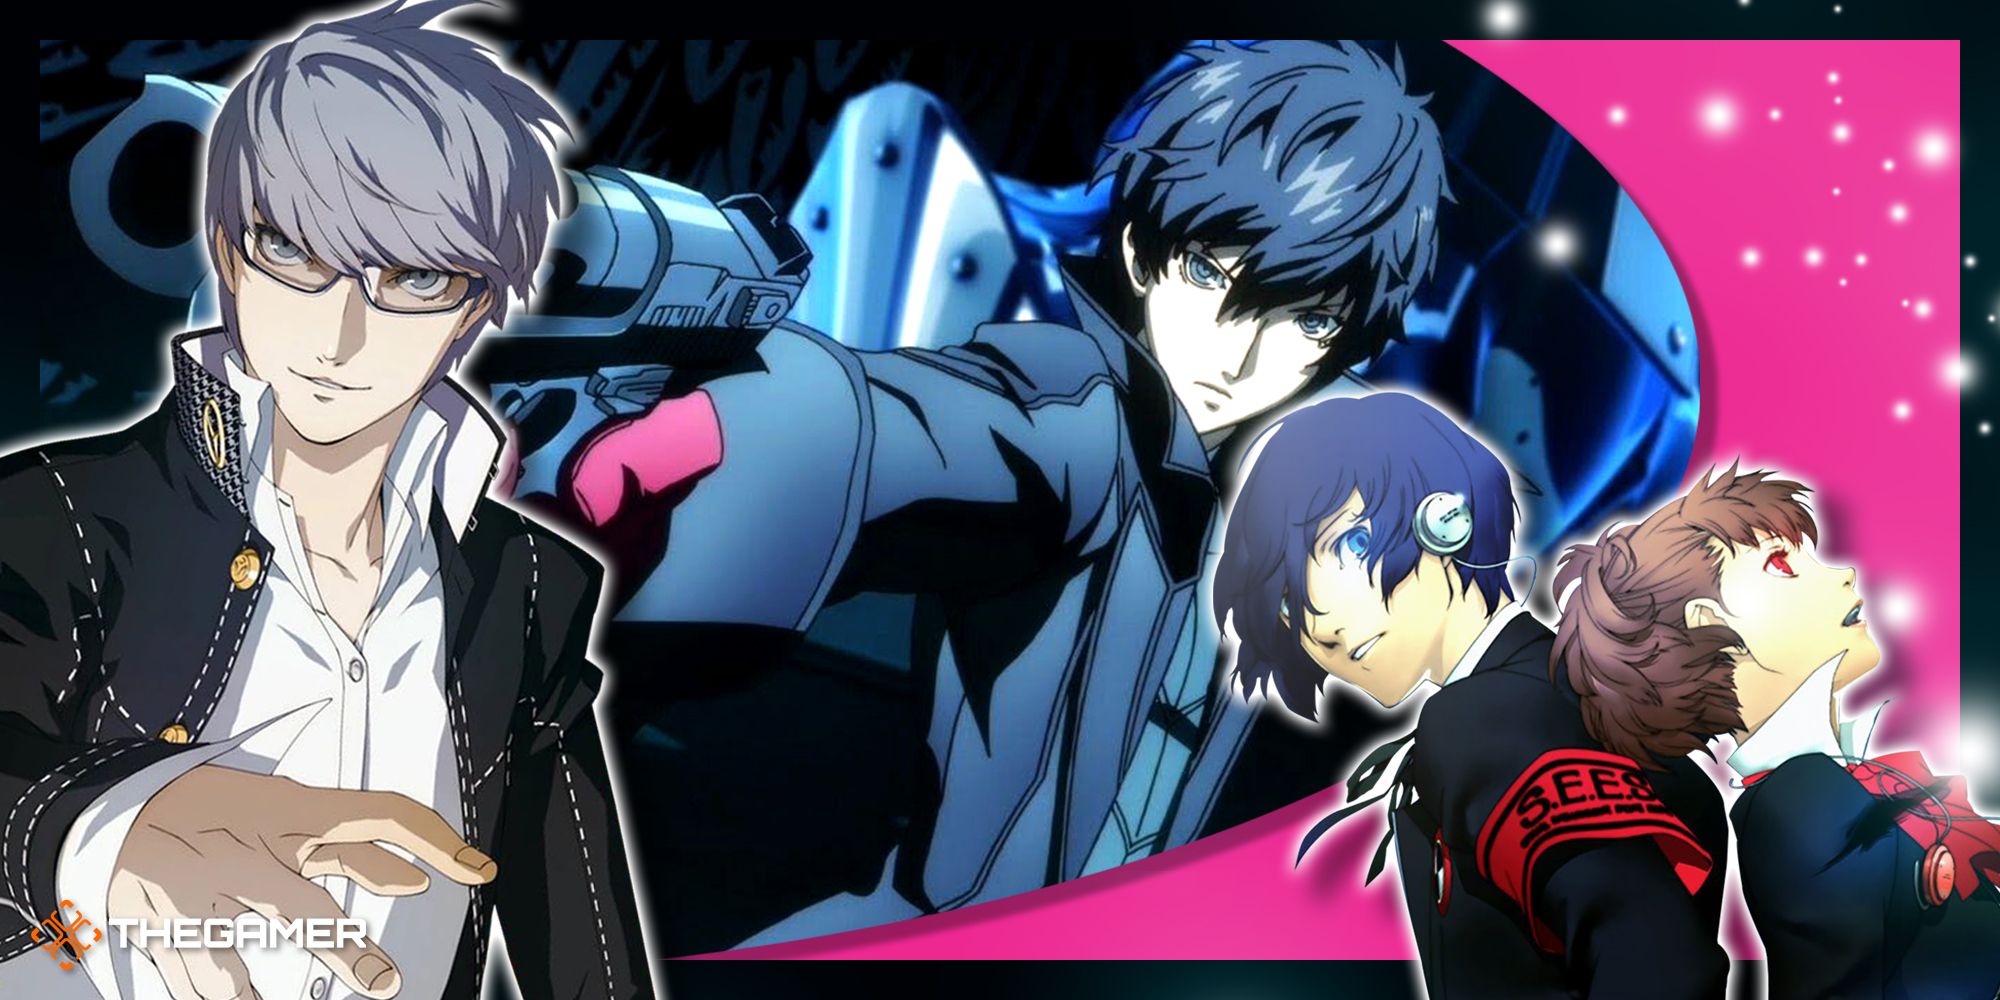 This Week's Japanese Game Releases: Persona 5 Royal for new